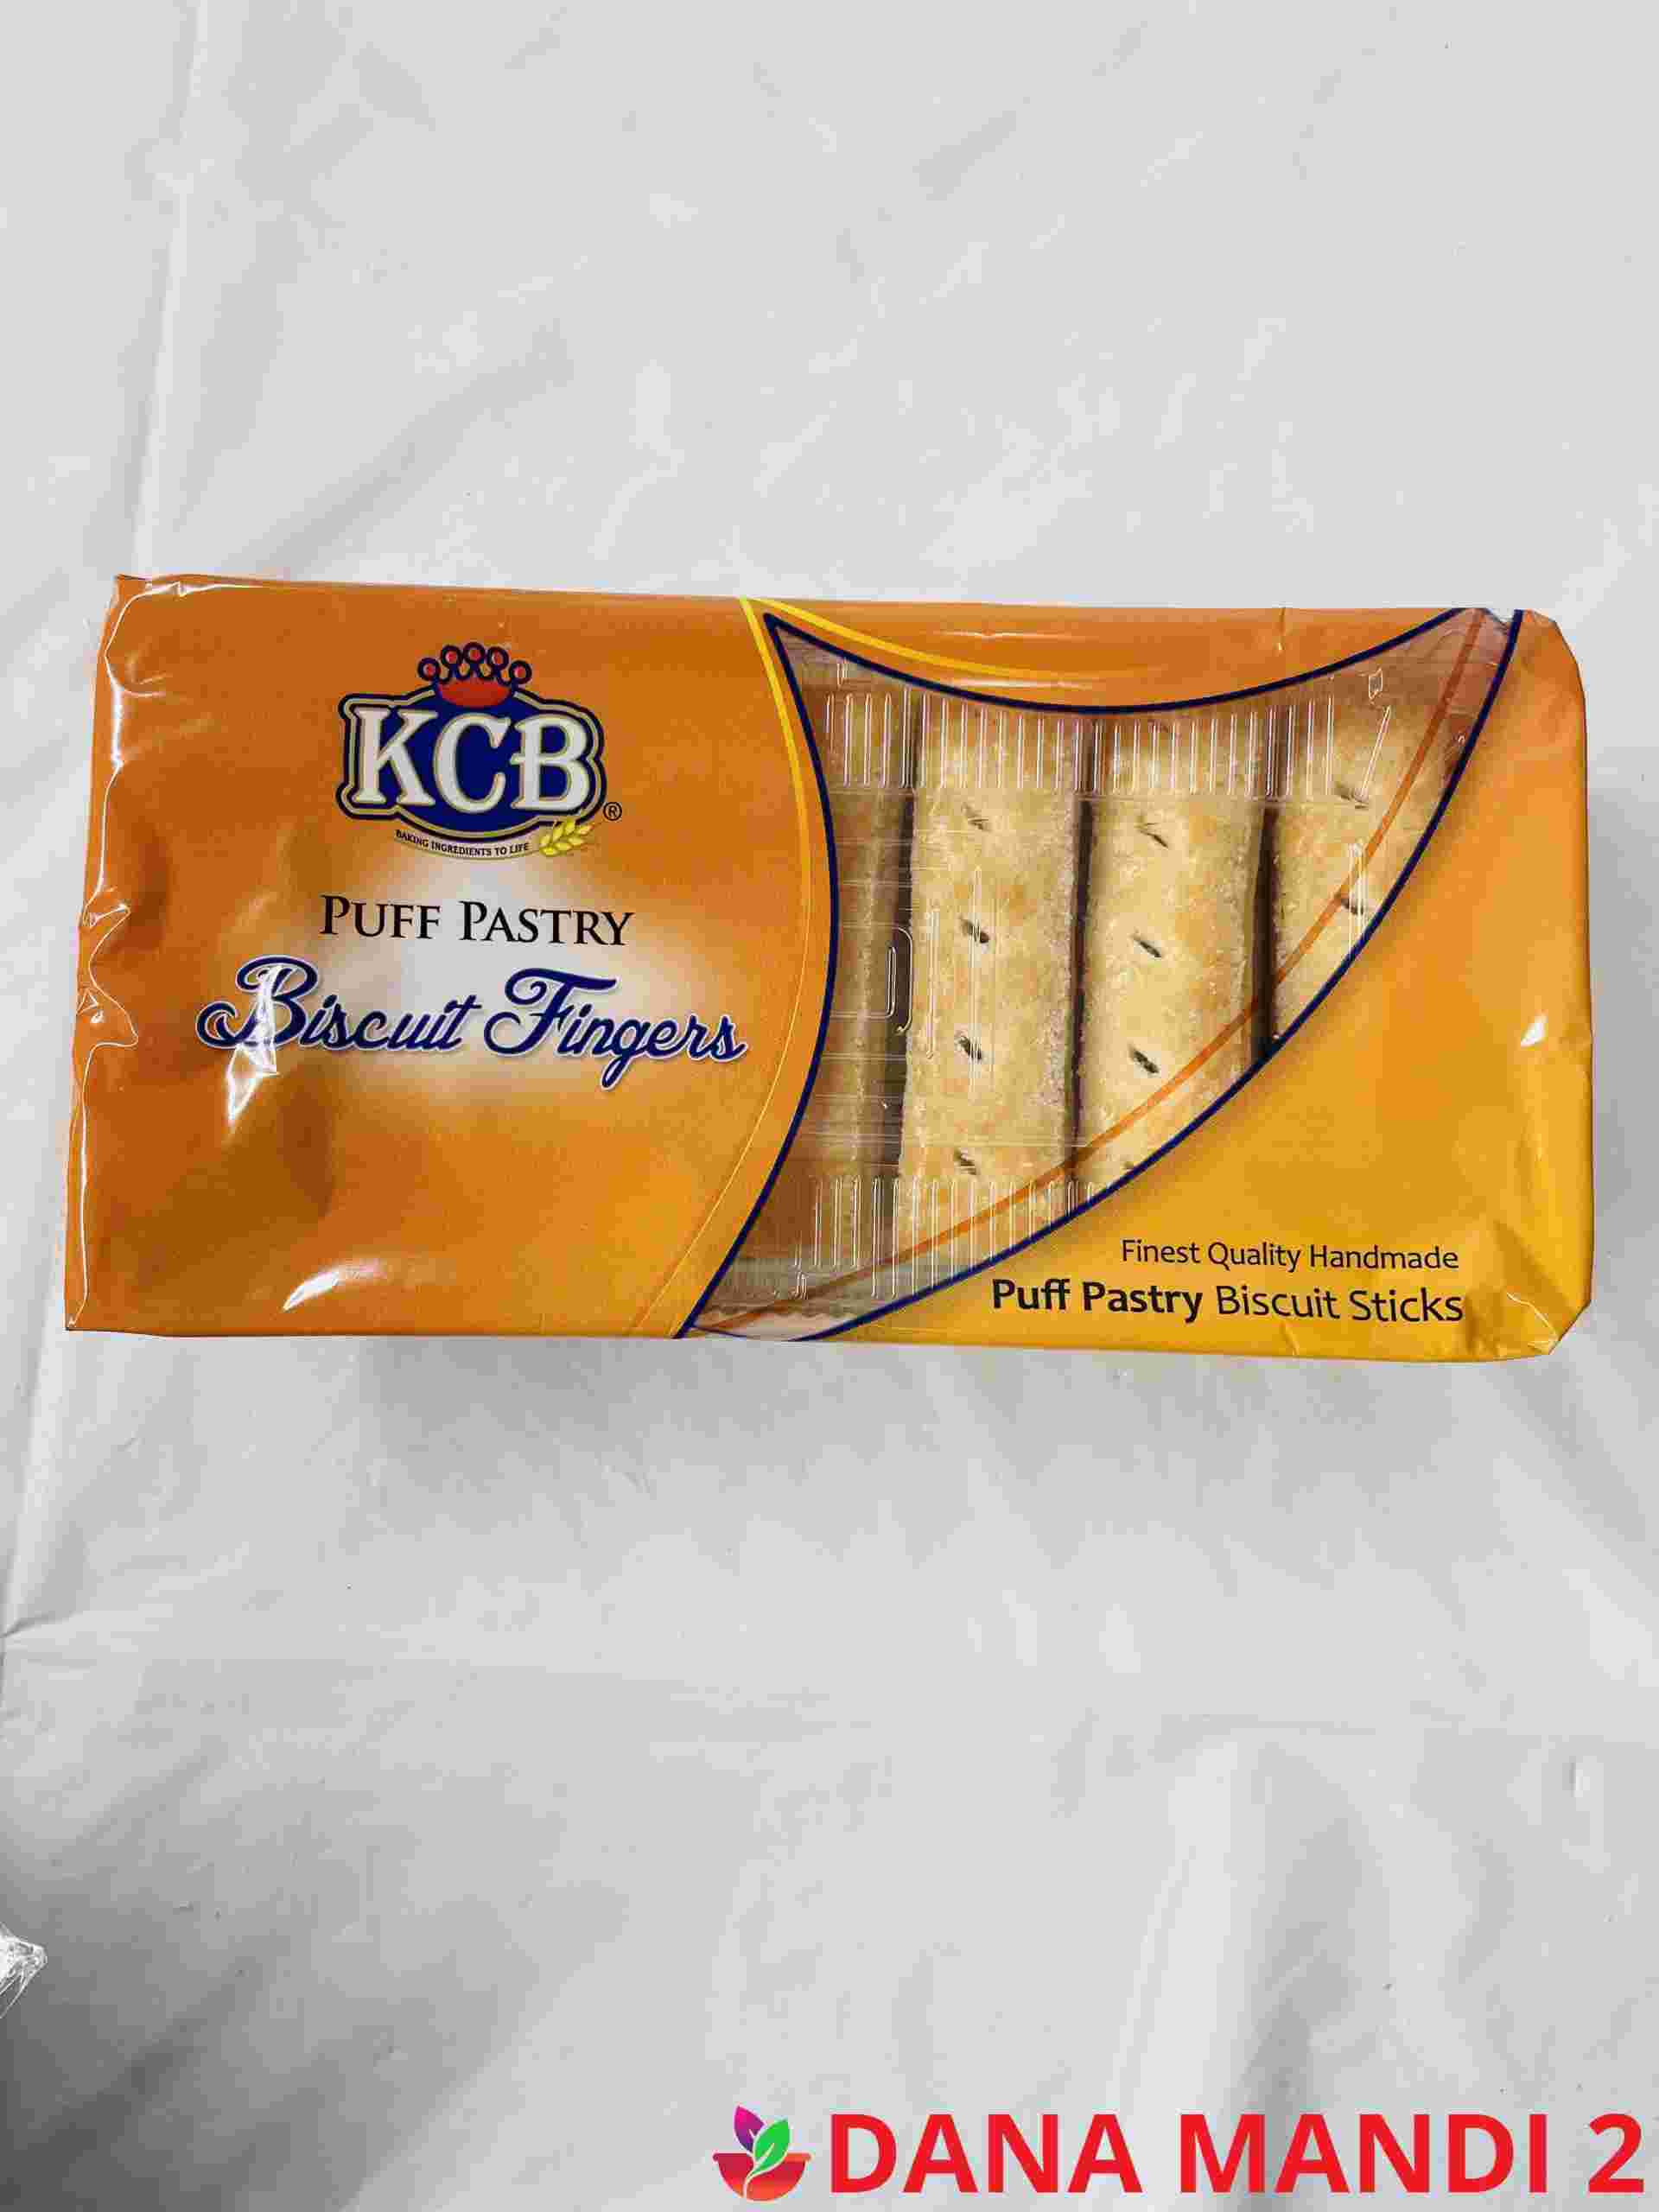 Kcb Puff Pastry